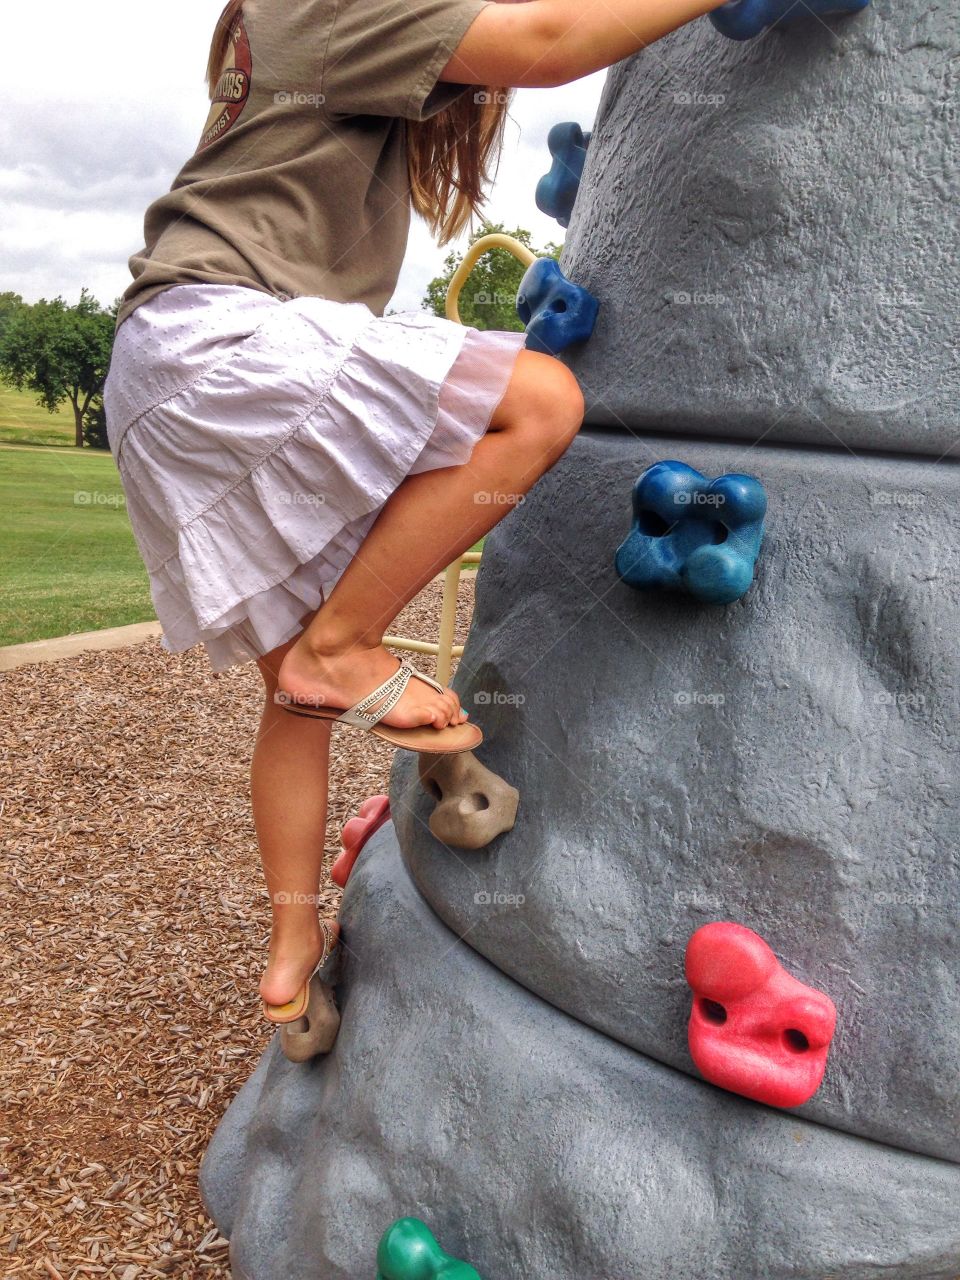 Ready for Everest. Girl climbing rock wall at the park